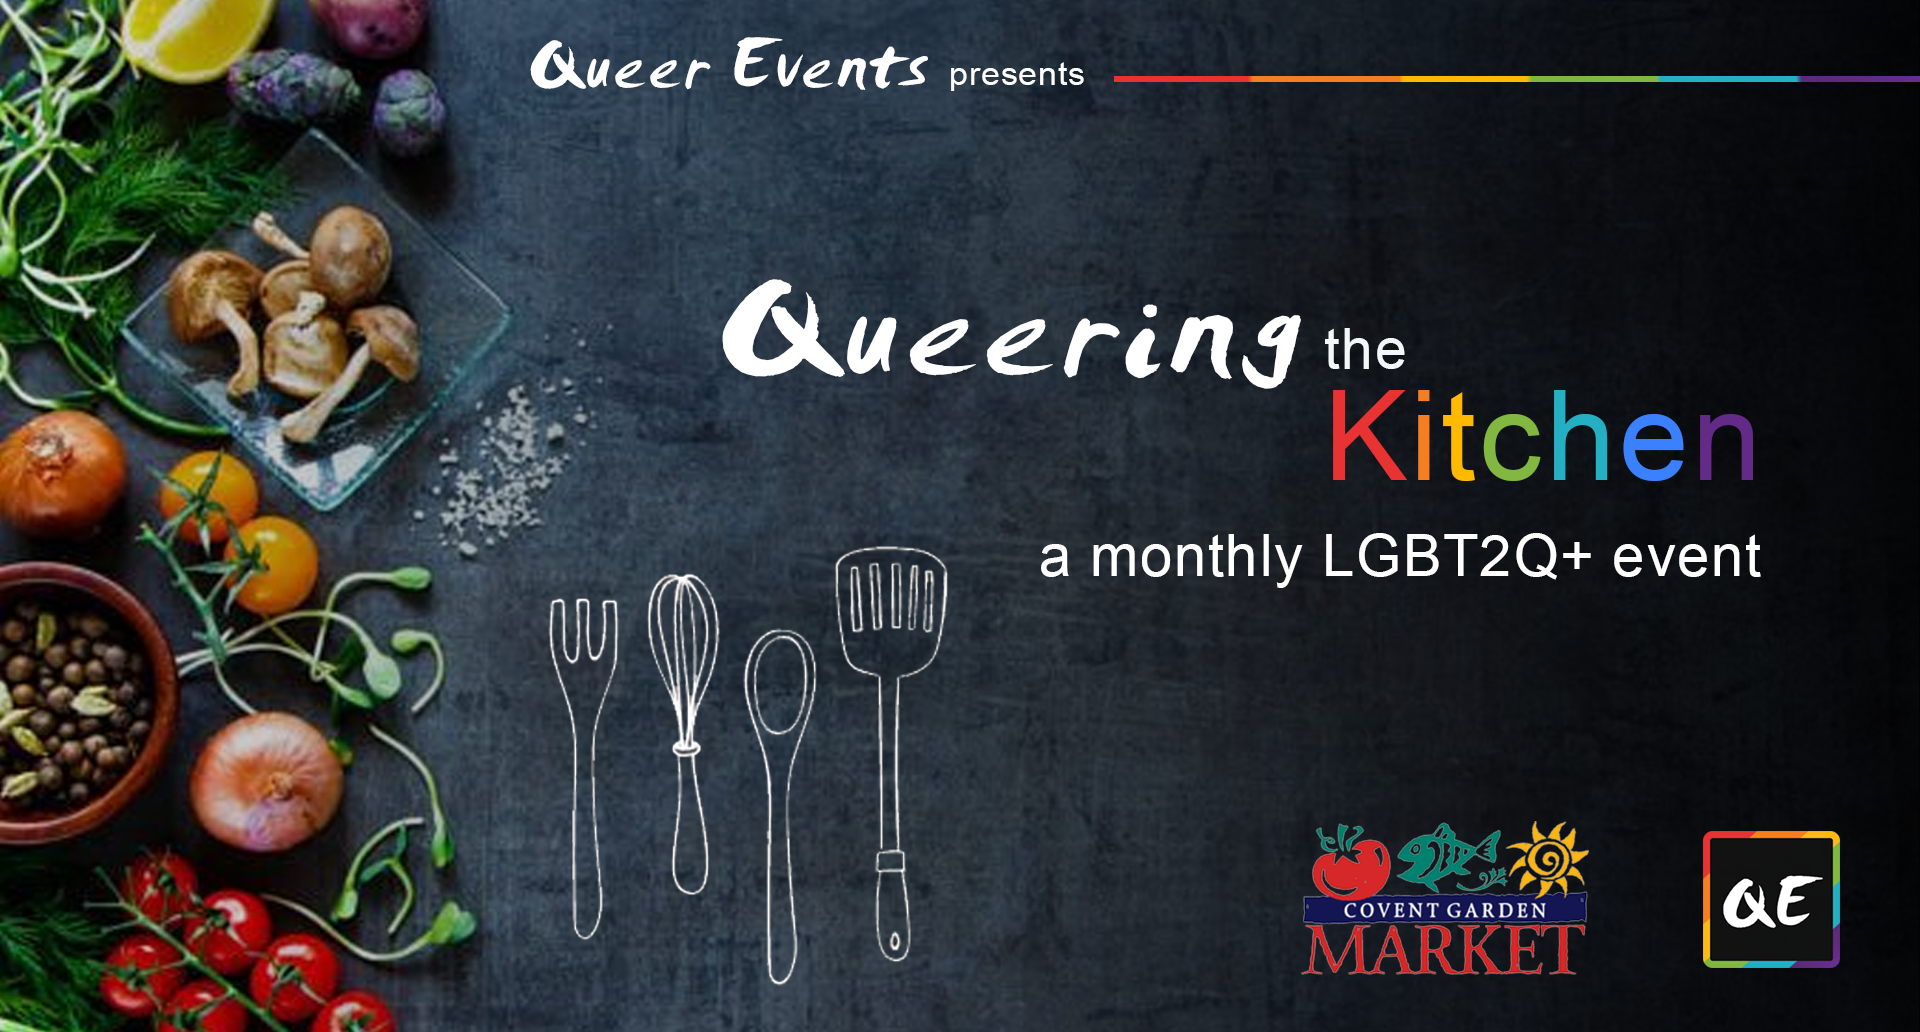 QueerEvents.ca - London event listing - Queering the Kitchen presented by QE